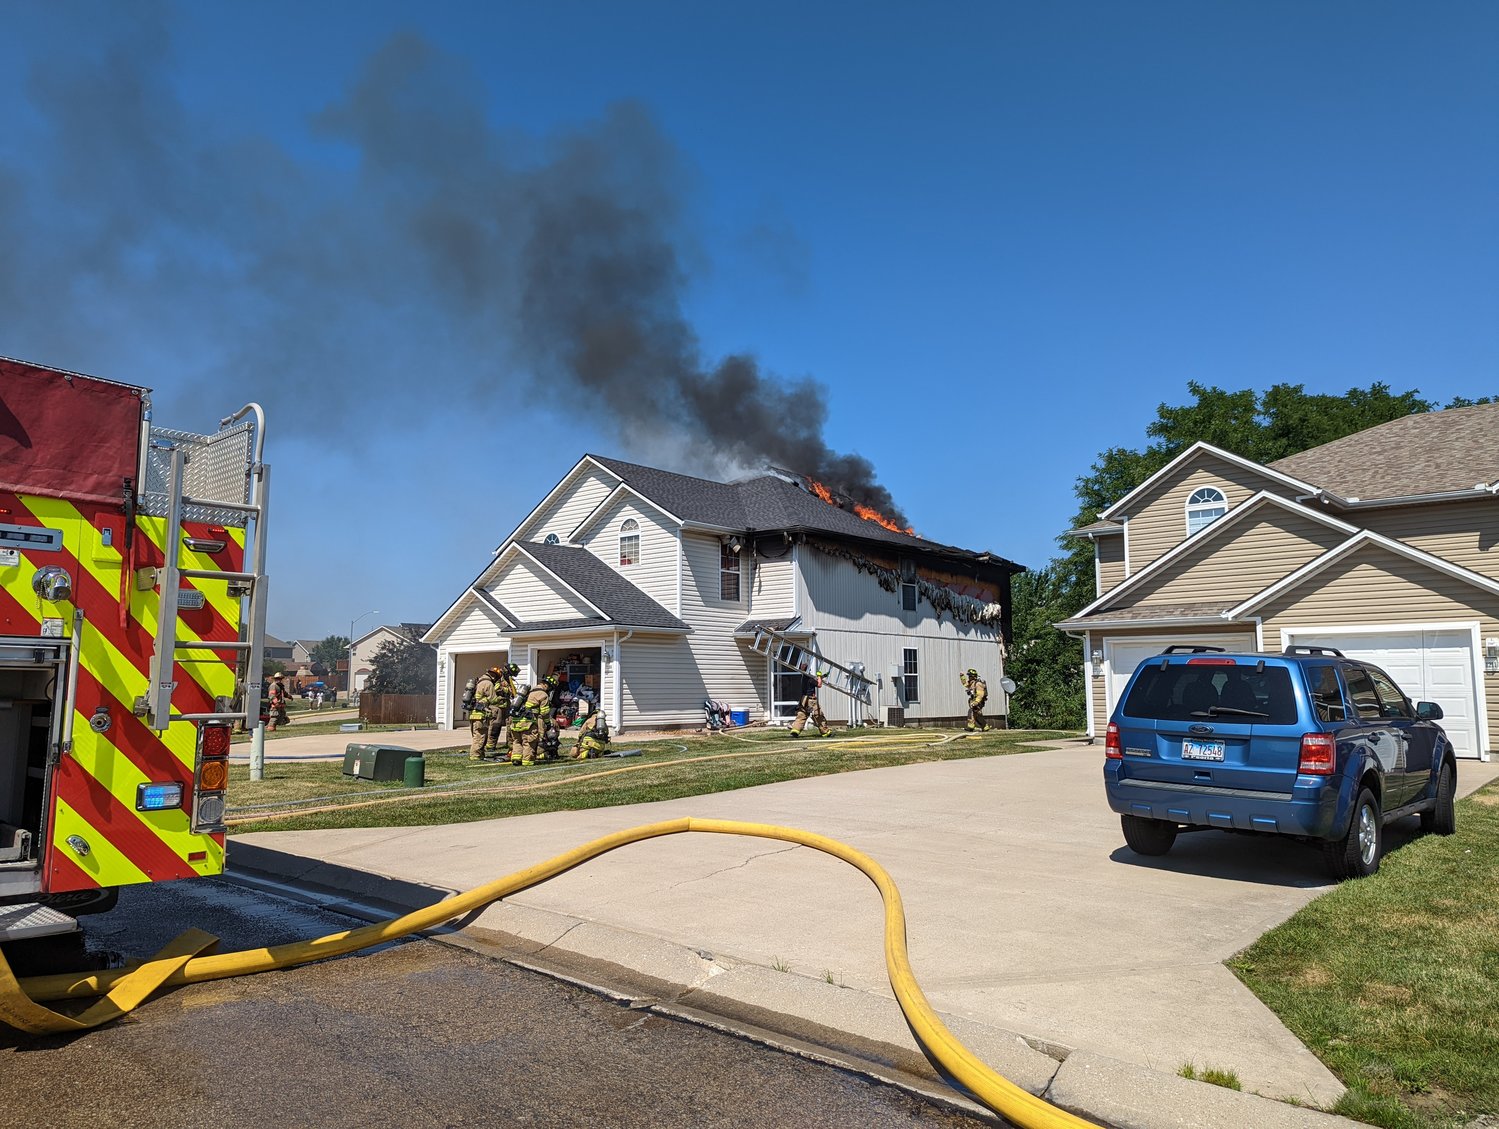 Firefighters from the Warrensburg Fire Department and the Johnson County Fire Protection District work to extinguish a structure fire Sunday, July 10, in the 1200 block of Pebblecreek Drive.